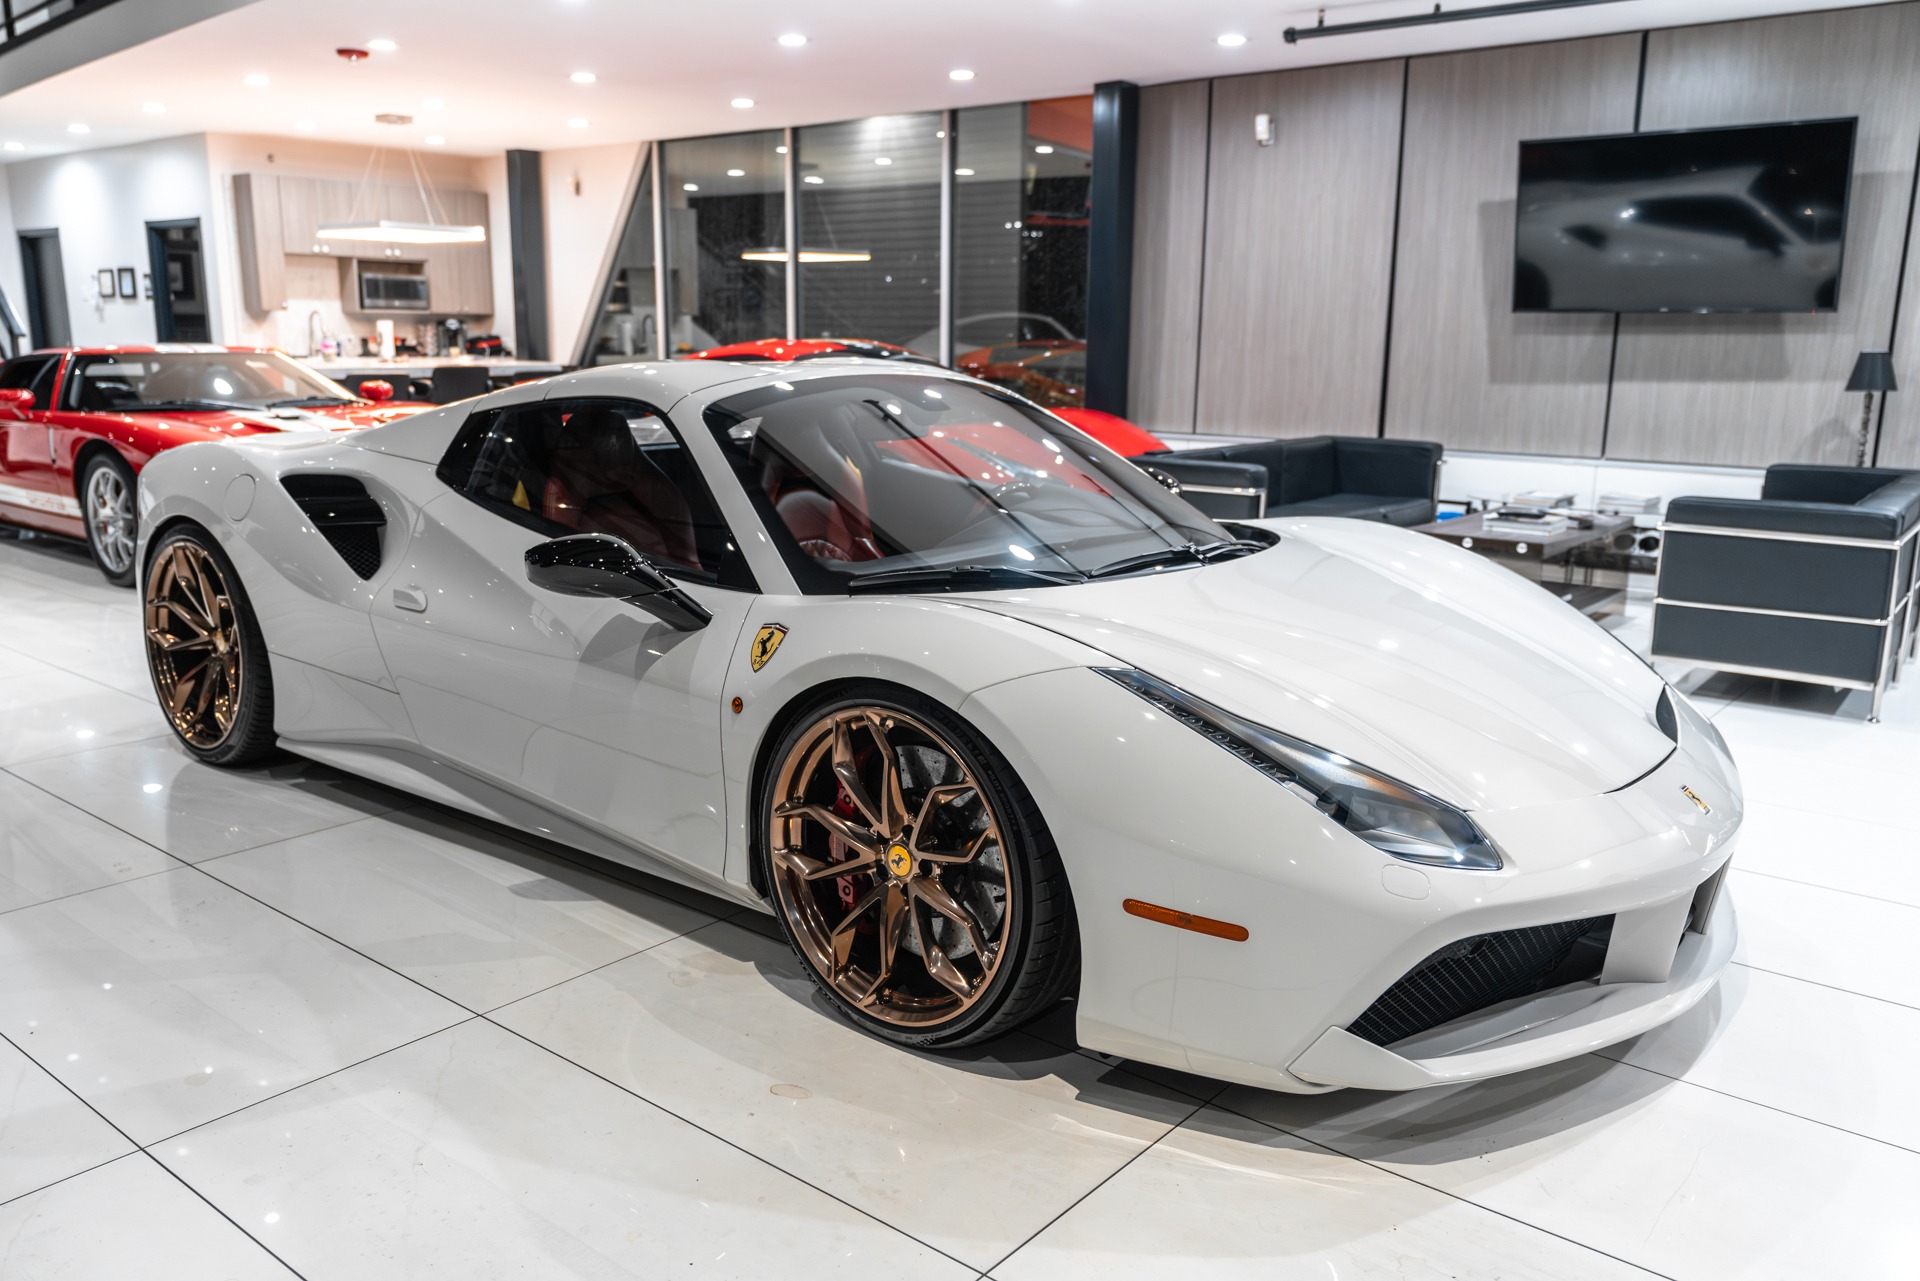 Used-2017-Ferrari-488-Spider-Pure-Turbos-40k-in-UPGRADES-HRE-WHEELS-PPF-Serviced